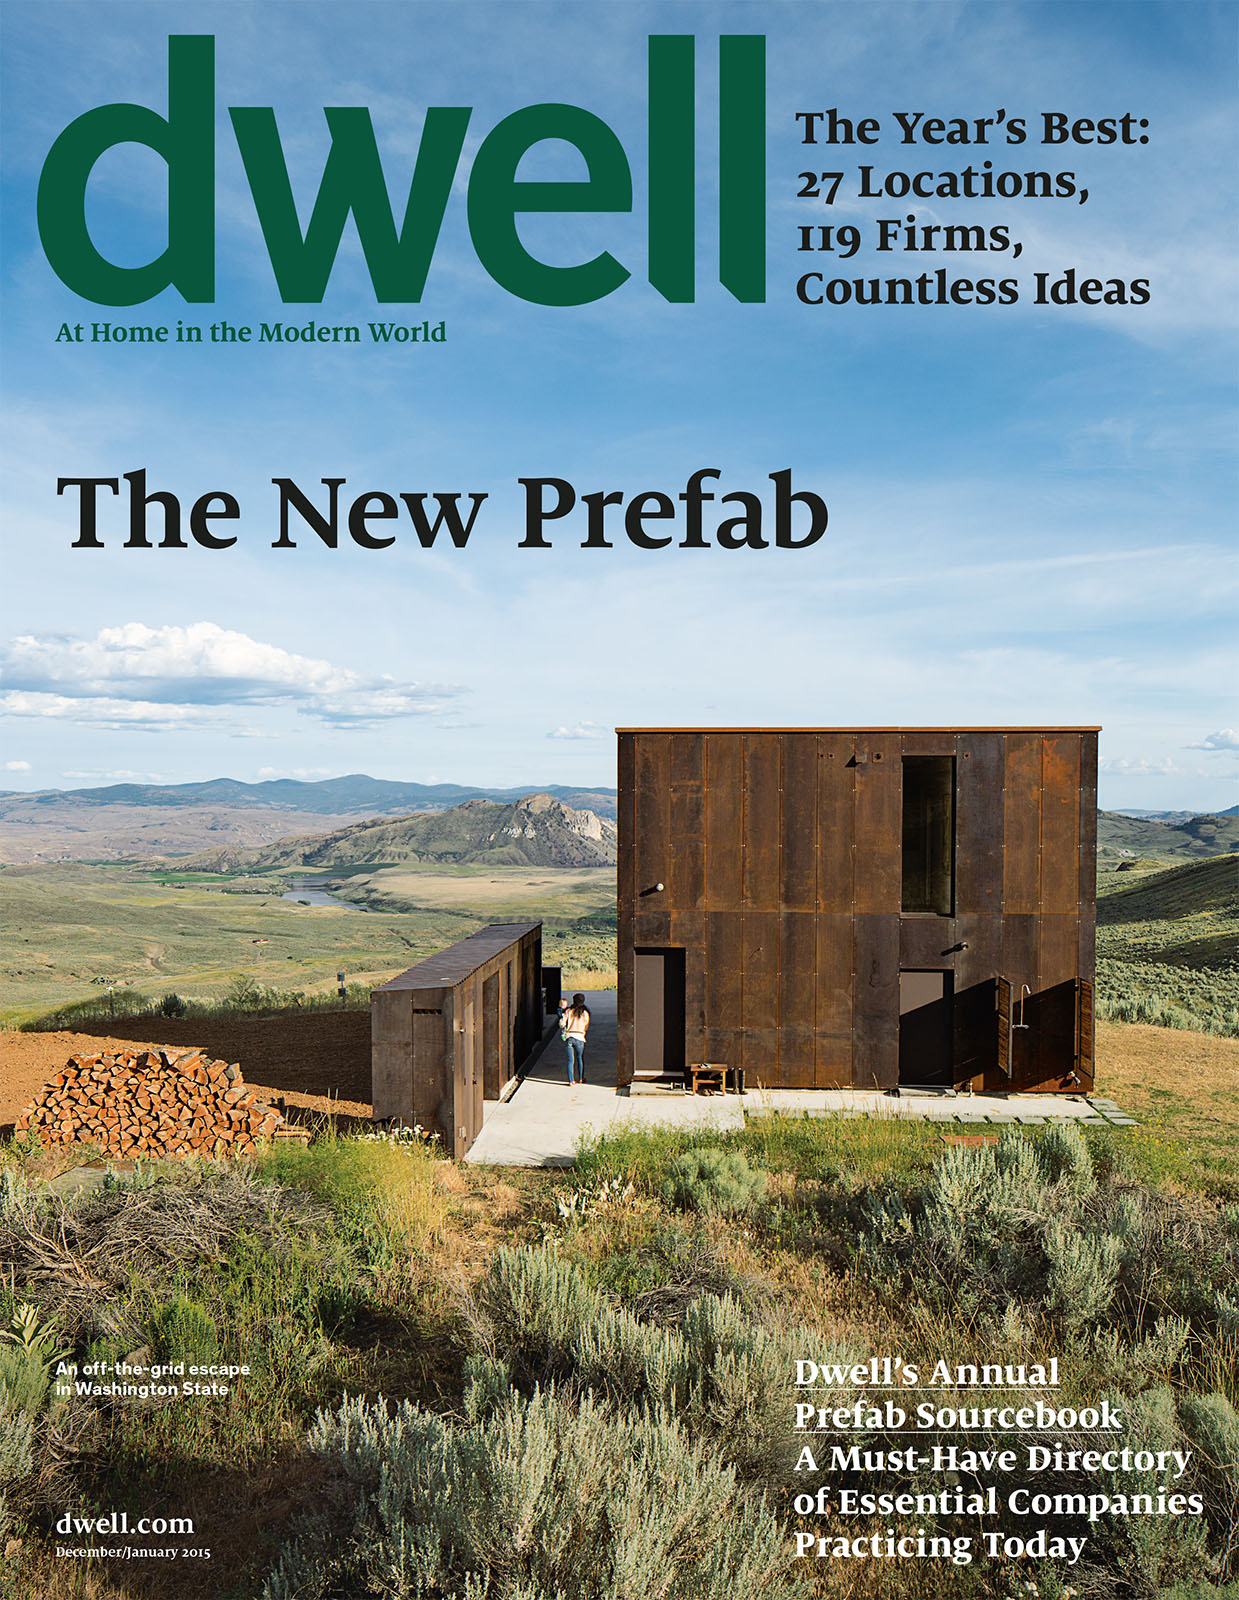 Dwell magazine subscription from 4.75 per year (Reg. up to 30)